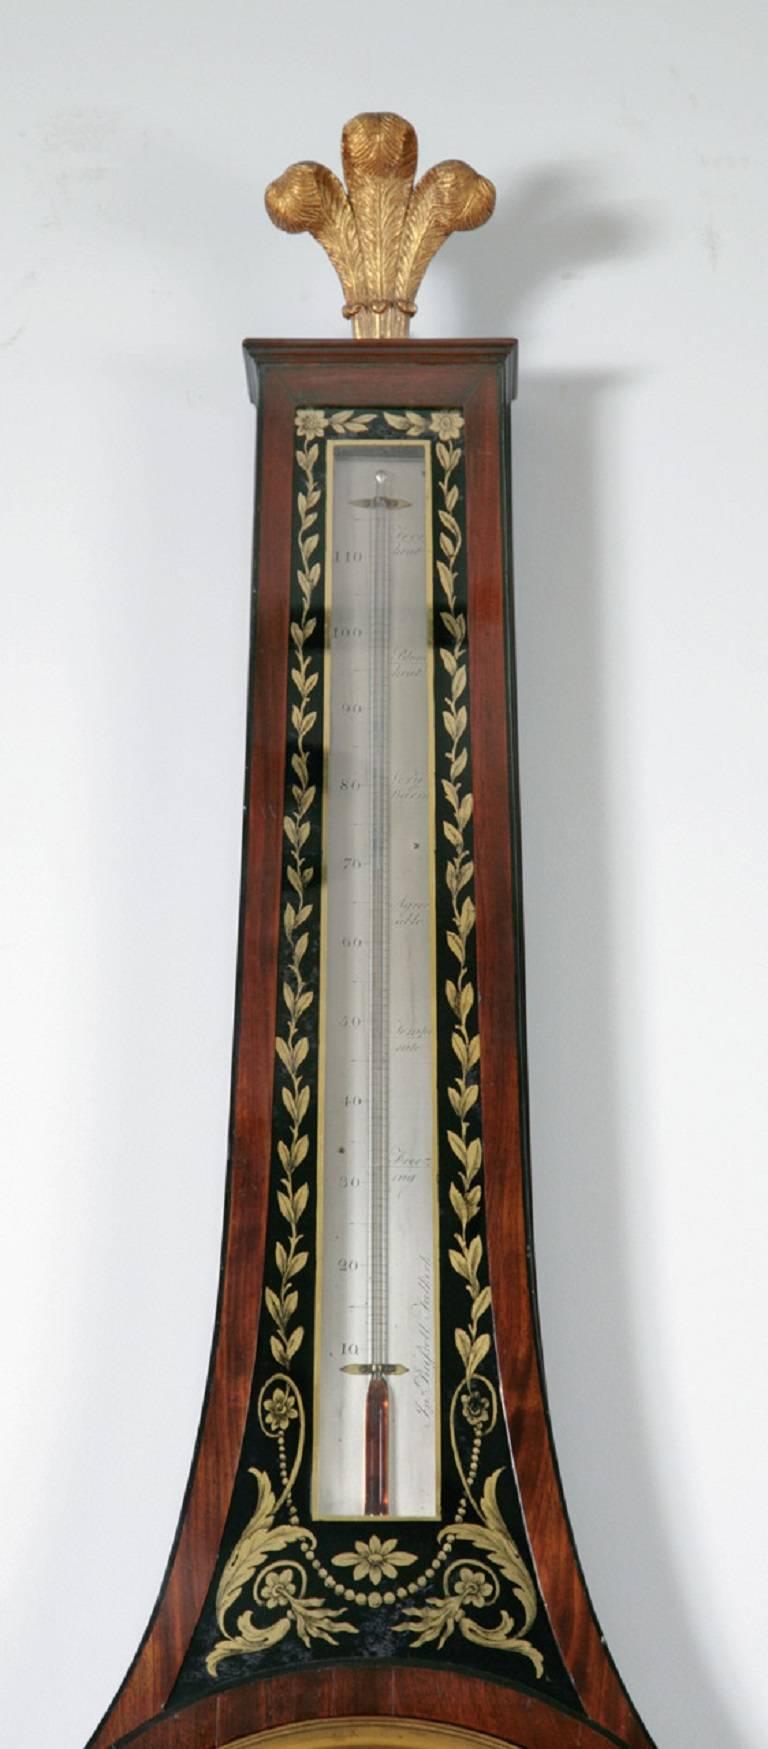 A fine and extremely rare early 19th Century Regency period wheel barometer by John Russell of Falkirk, barometer maker to the Prince Regent. This elegant barometer has a frame veneered in figured mahogany, with ebony stringing, and is surmounted by